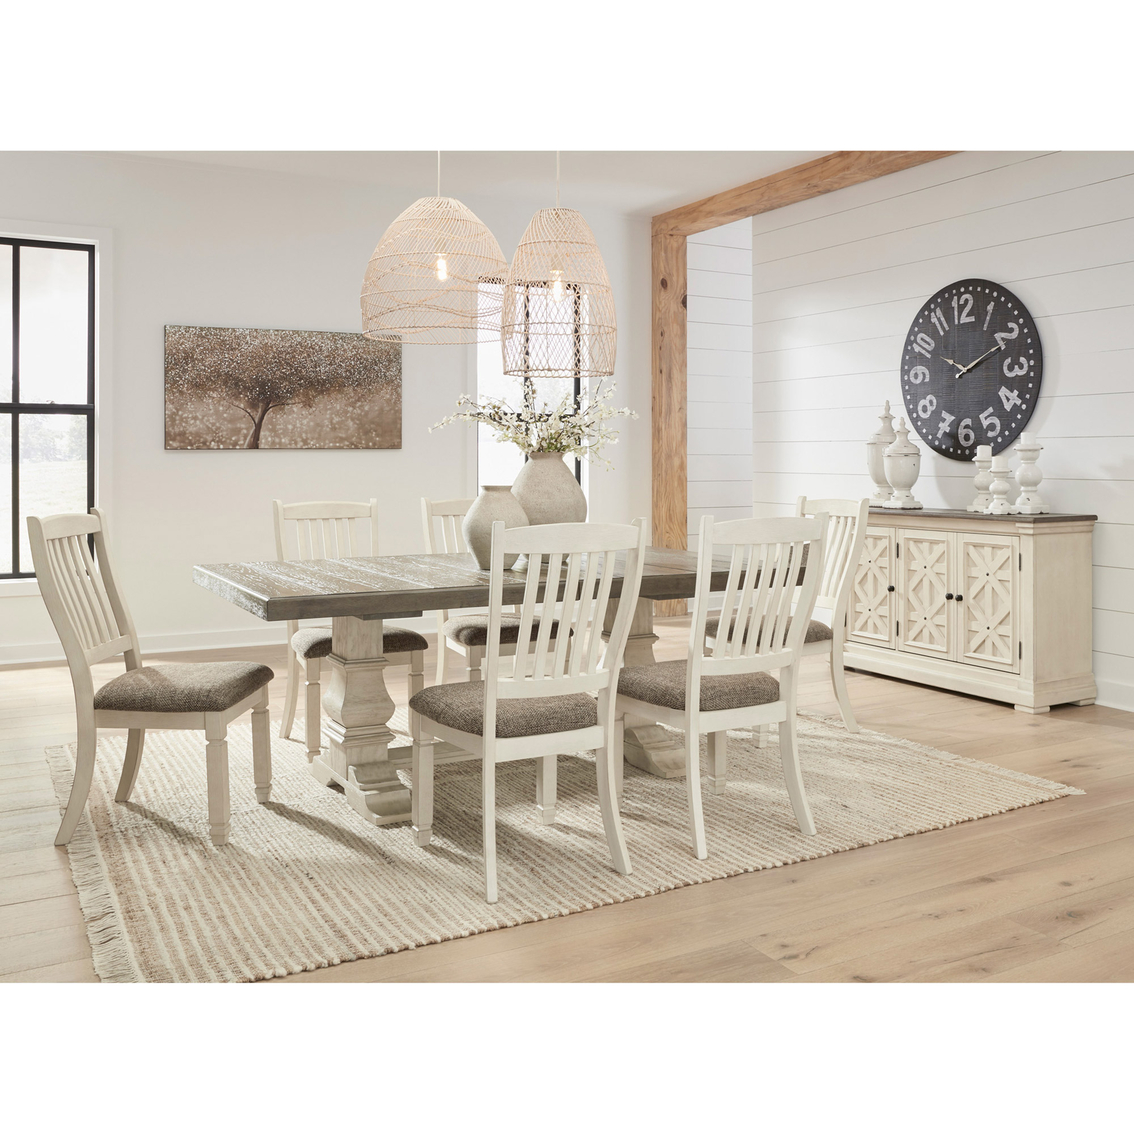 Signature Design by Ashley Bolanburg 7 pc. Dining Set: Table, 6 Side Chairs - Image 2 of 5